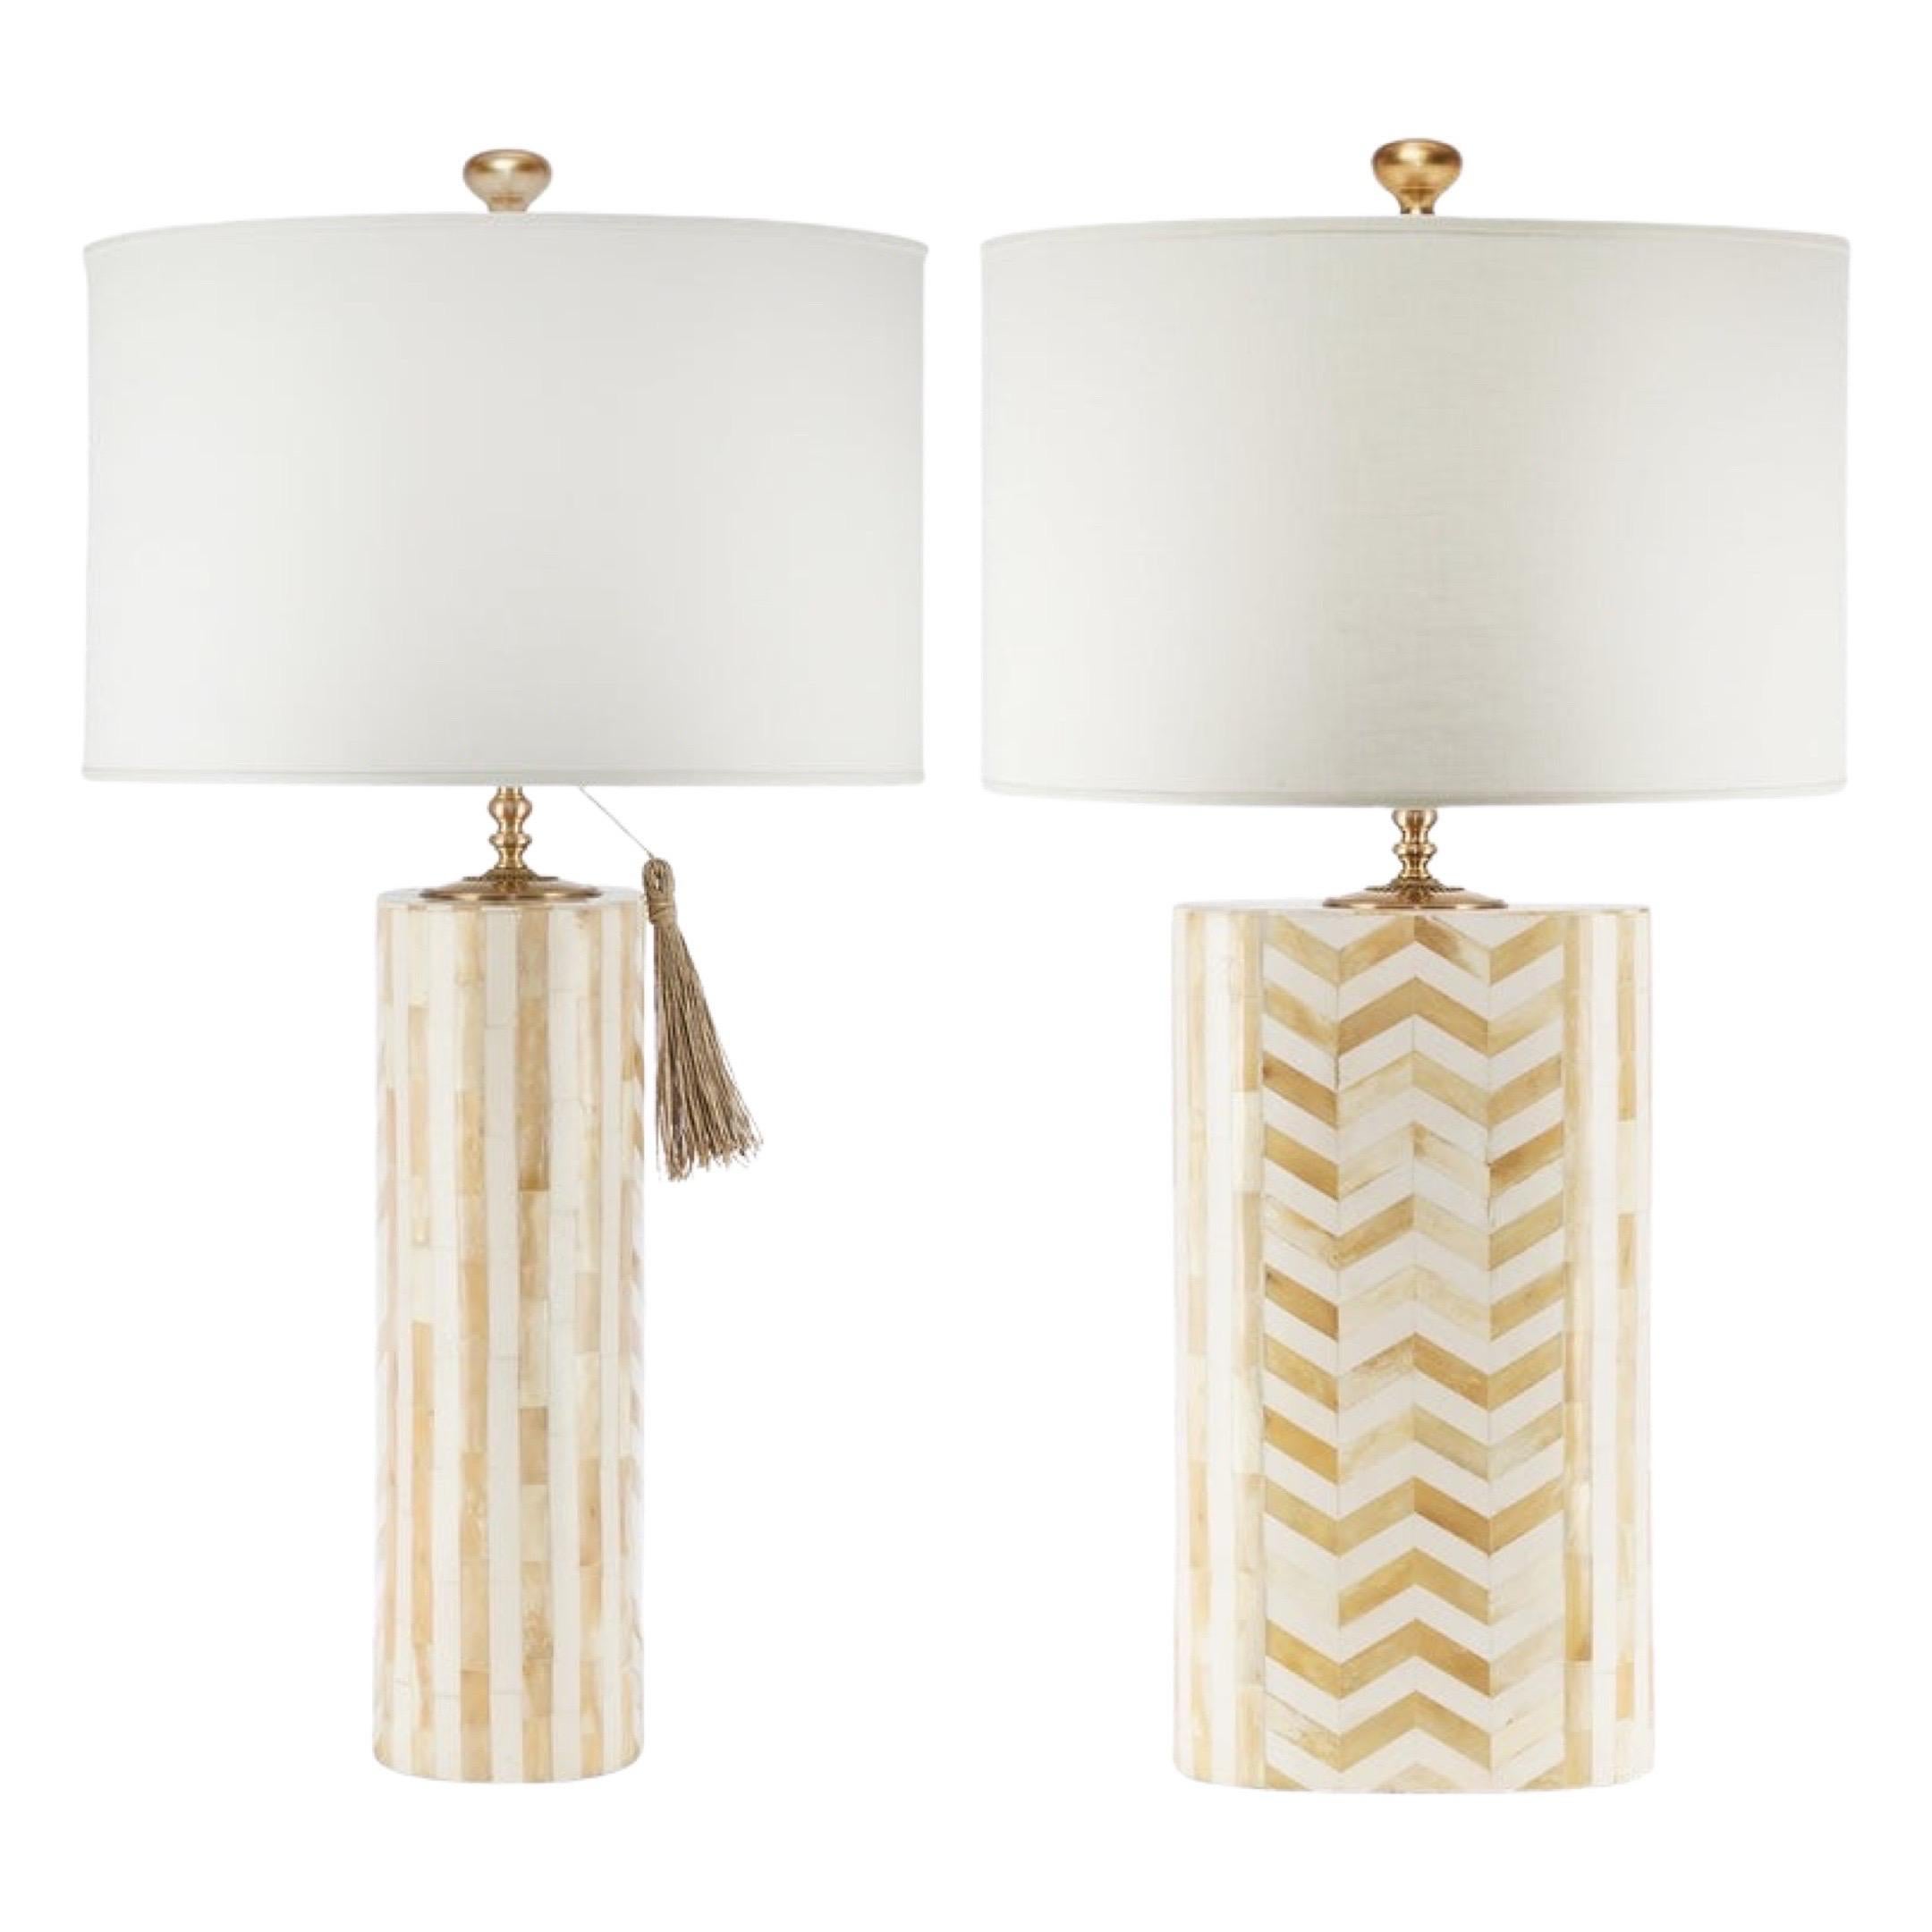 A very chic and modern pair of lamps. Beautifully made in tessellated bone in a mix of herringbone pattern and vertical columns. The gold details on the rosette and tap sculpted finalists make them so chic… even for the most discriminating taste